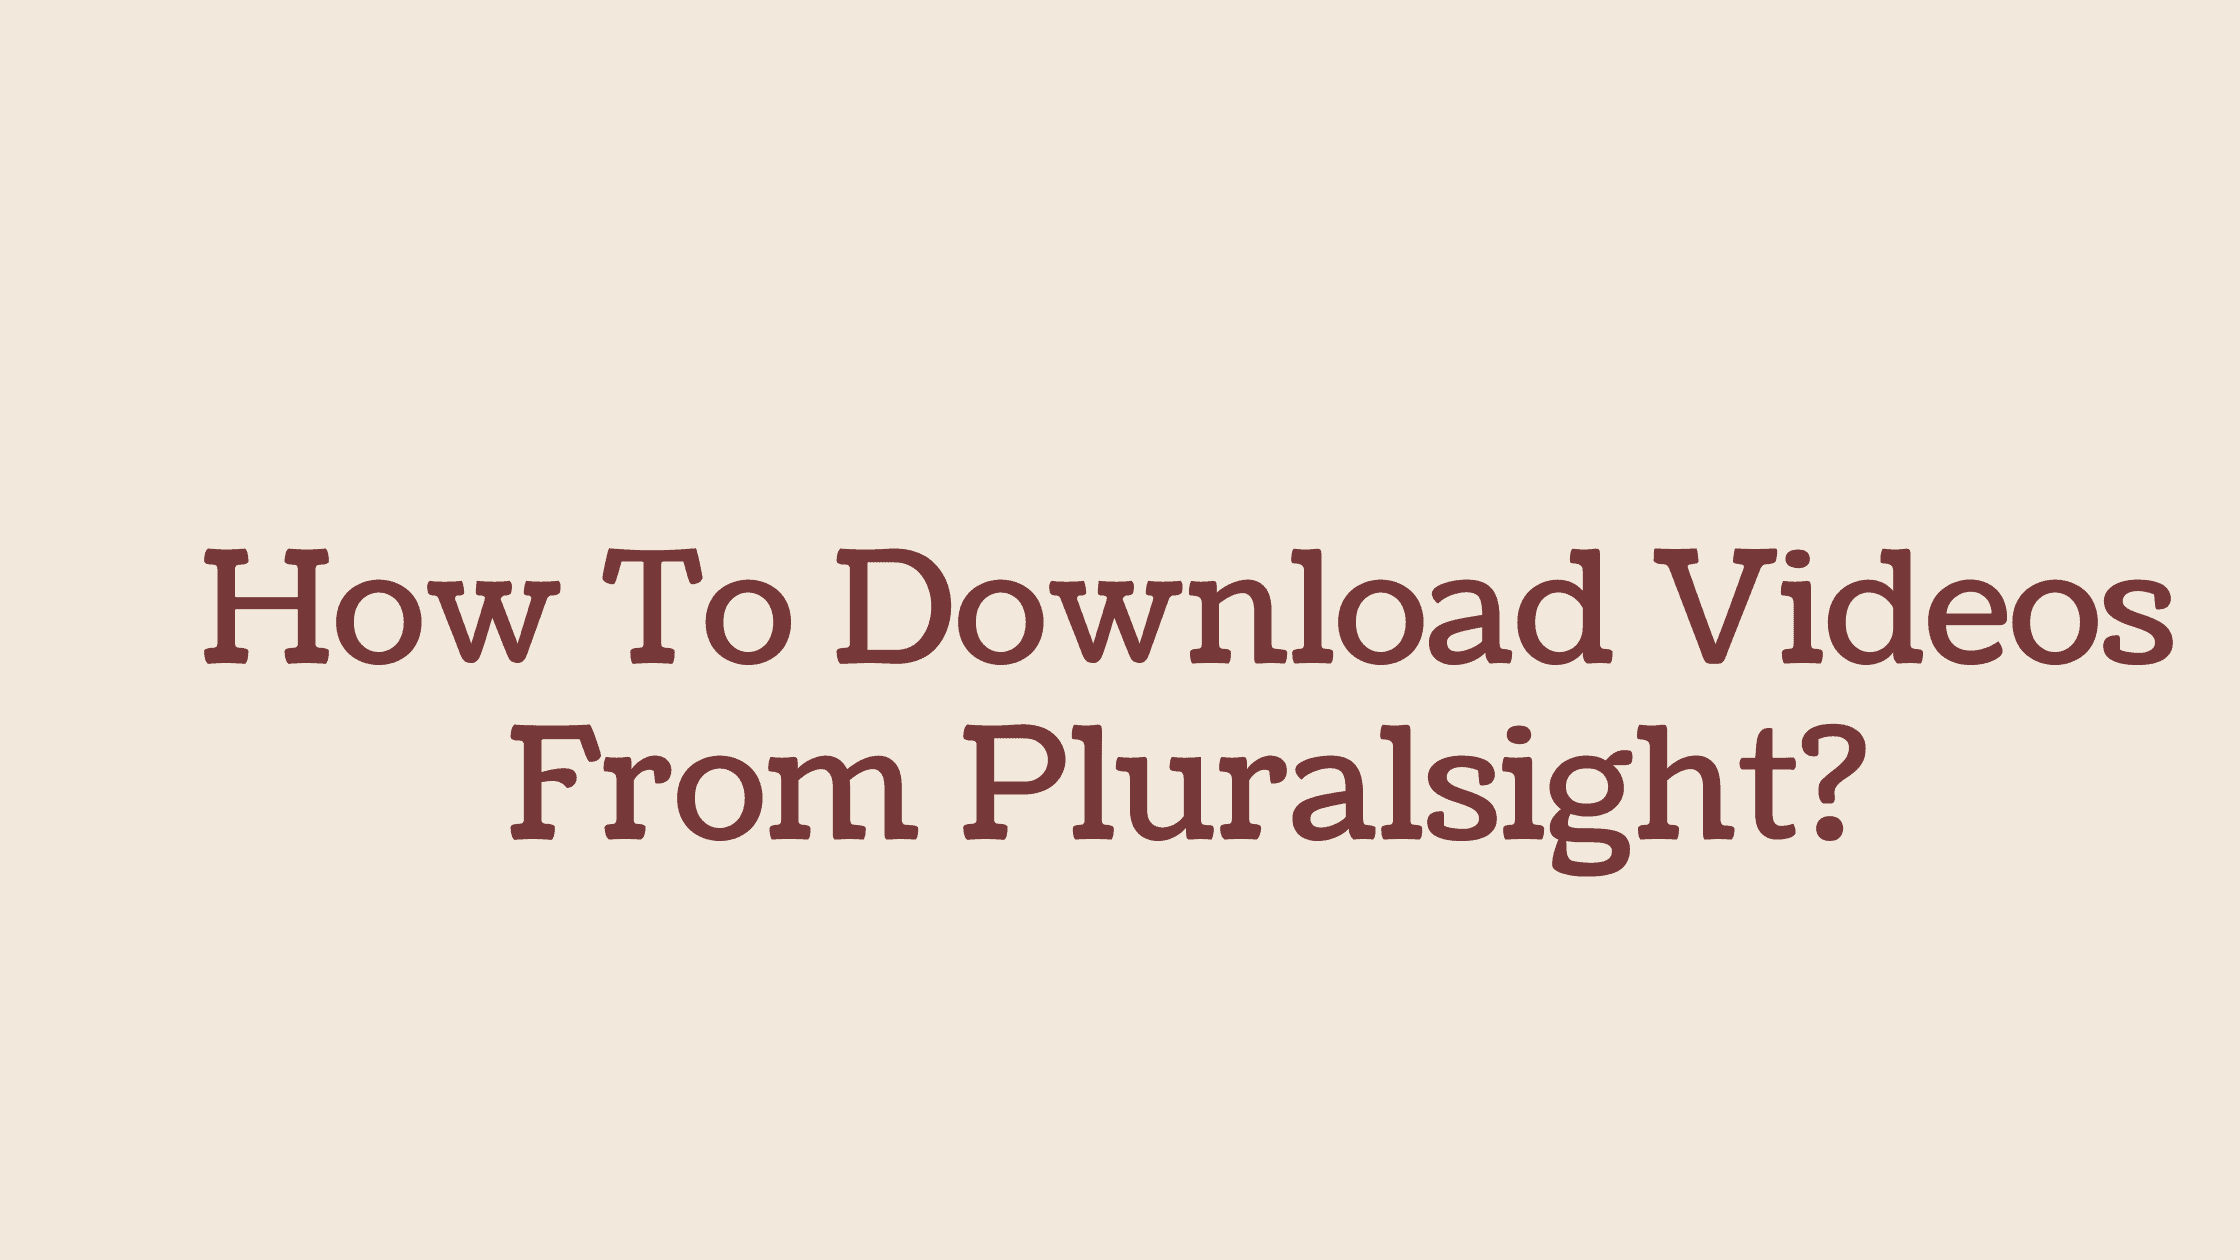 How To Download Videos From Pluralsight